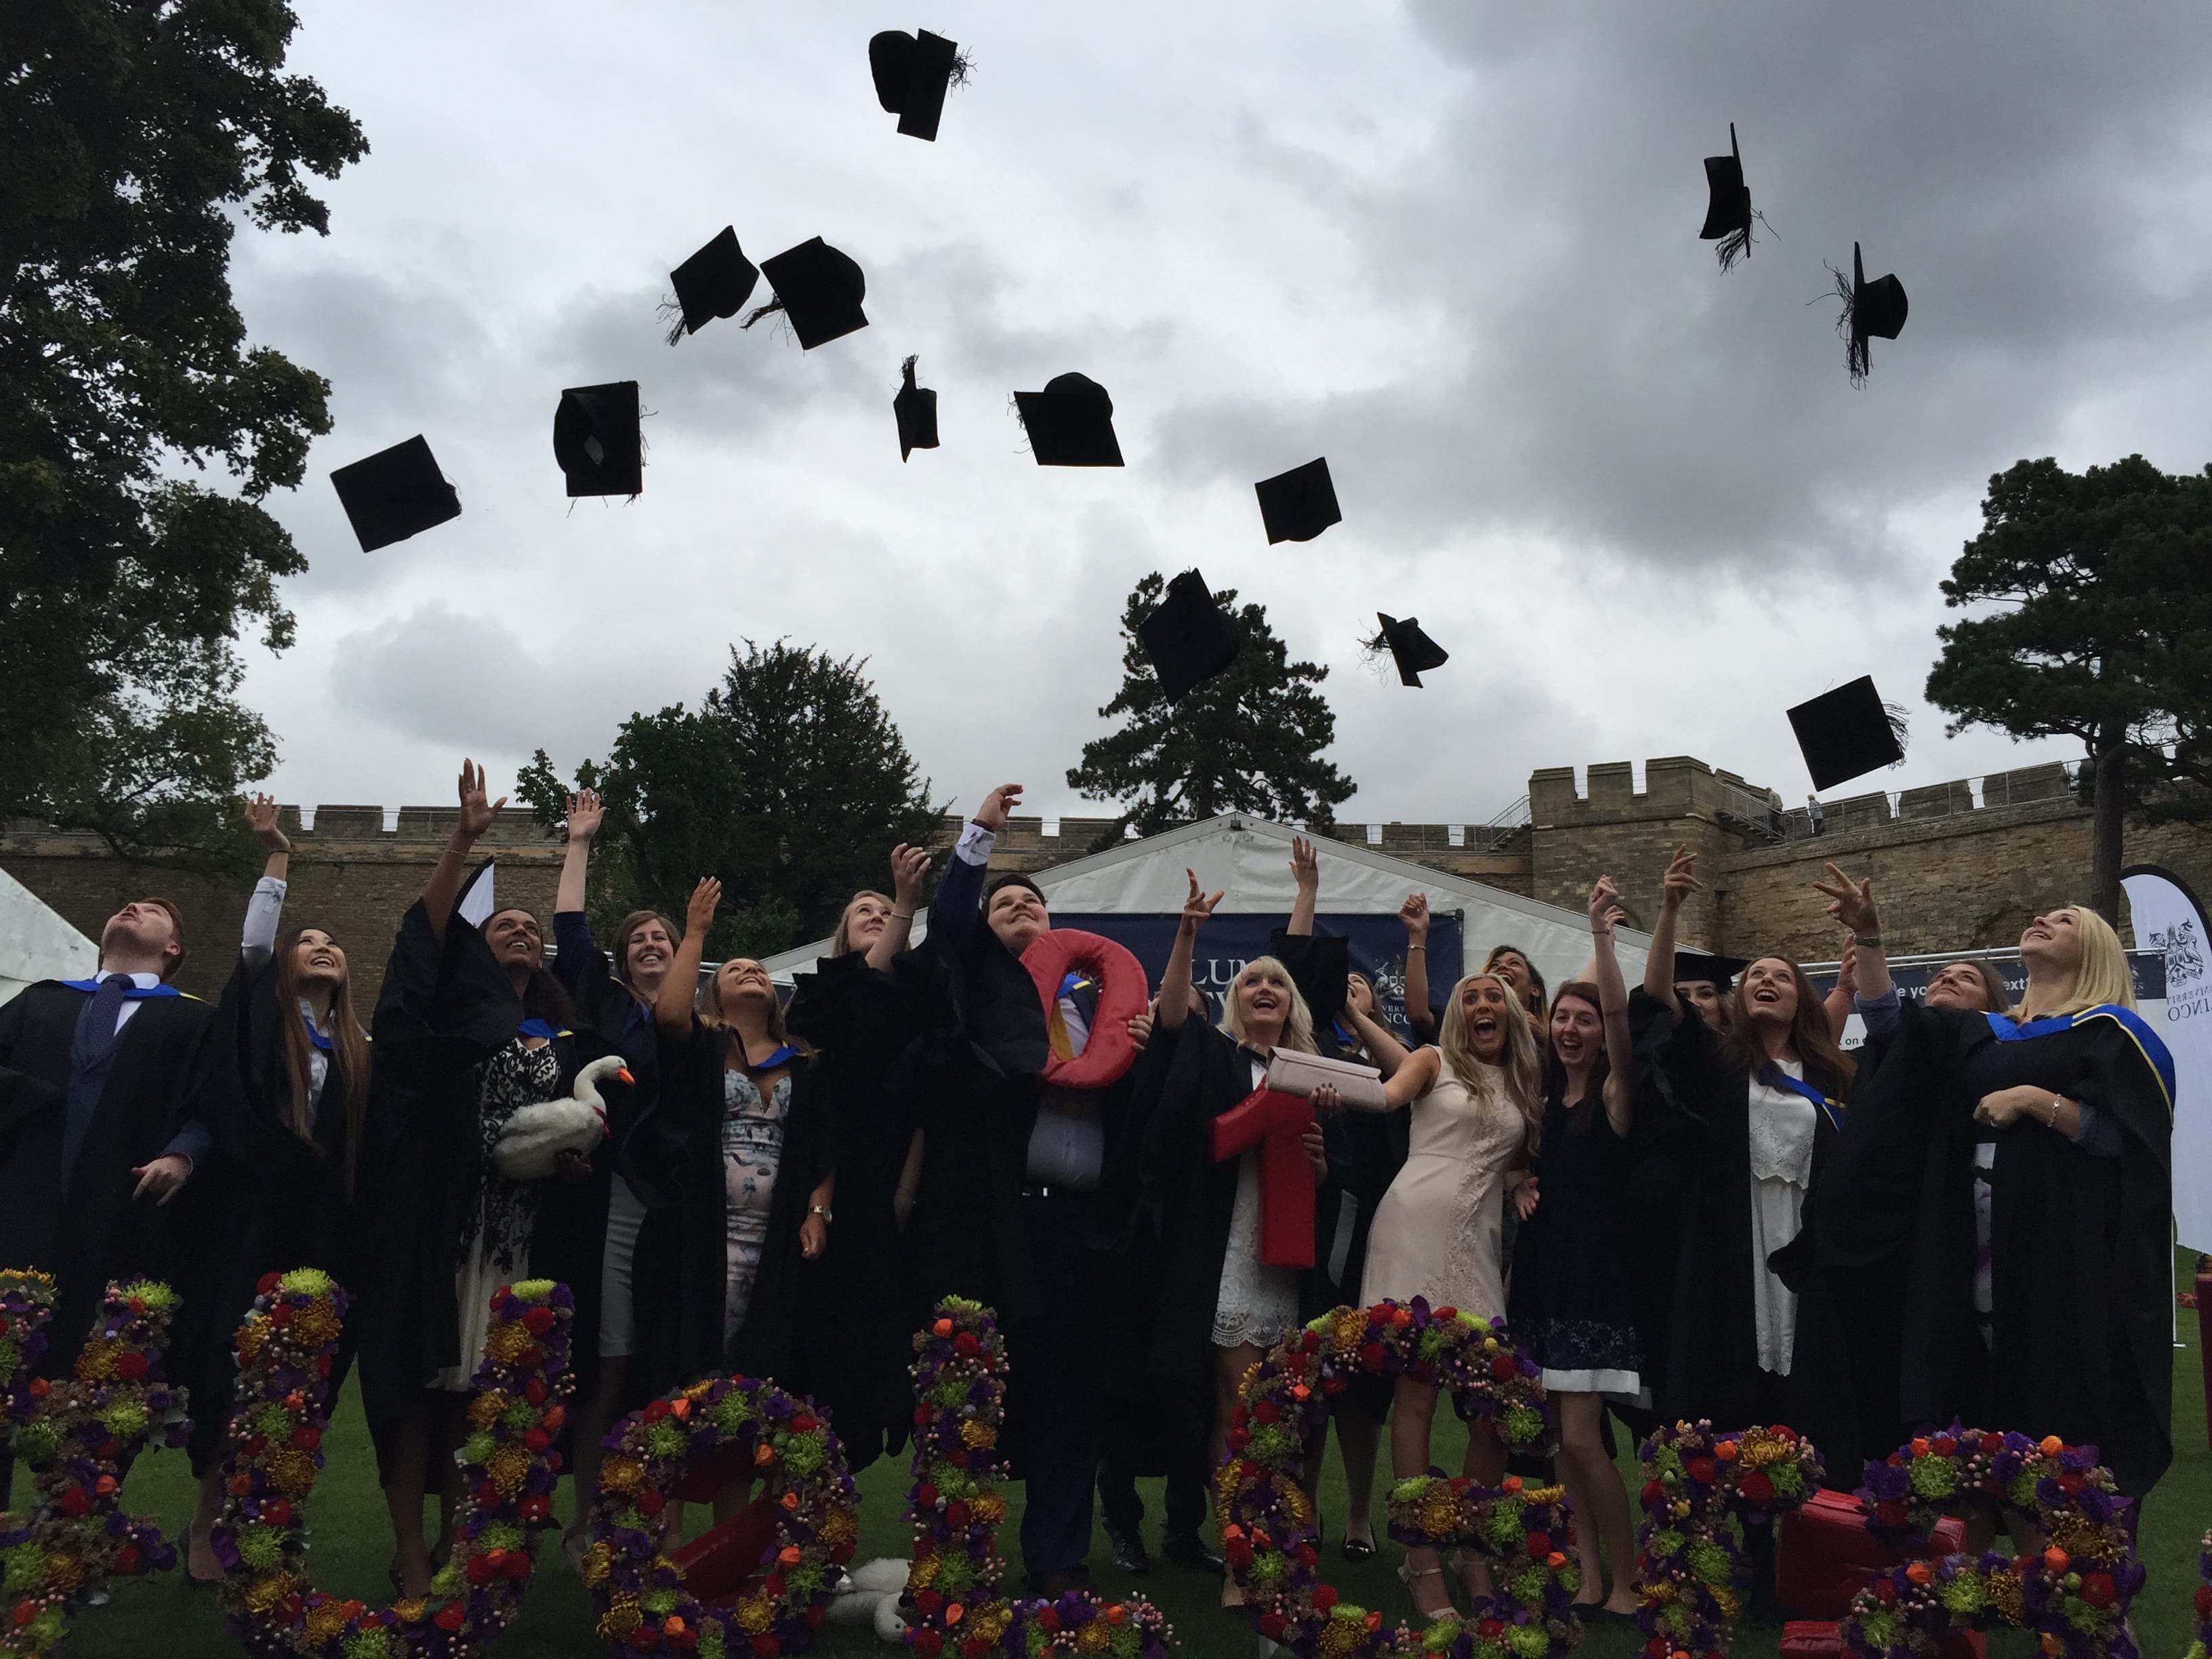 A First for Events Management Graduates